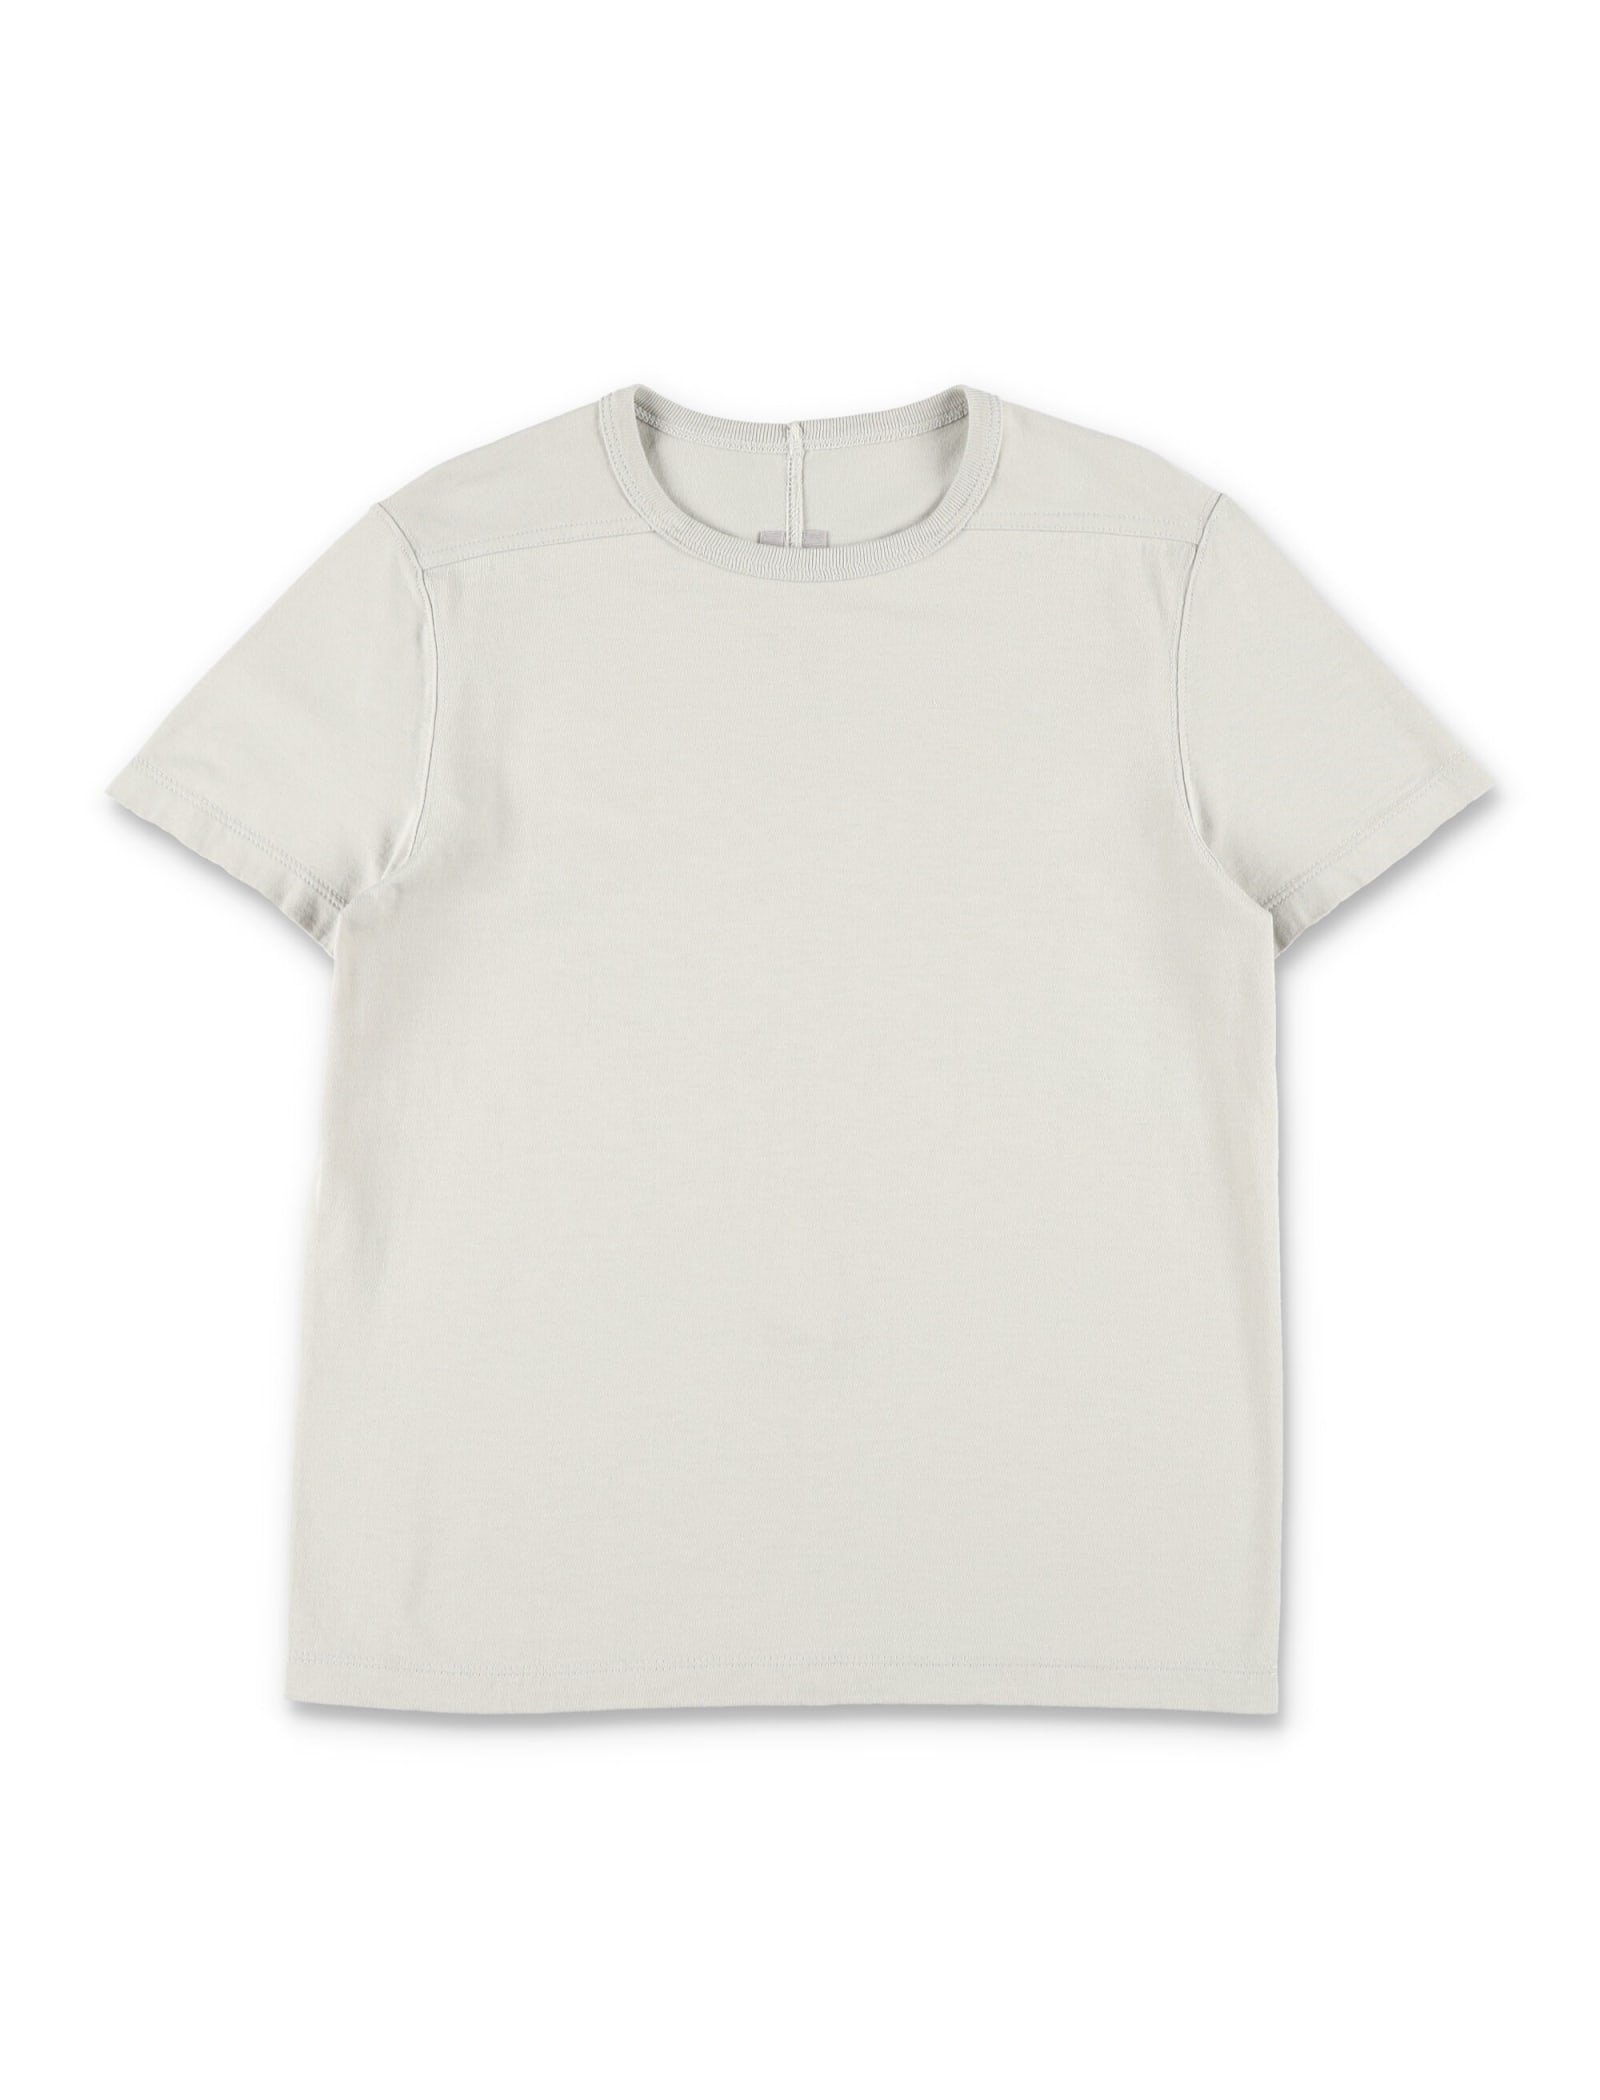 Rick Owens Kids' Short Level T In Pearl